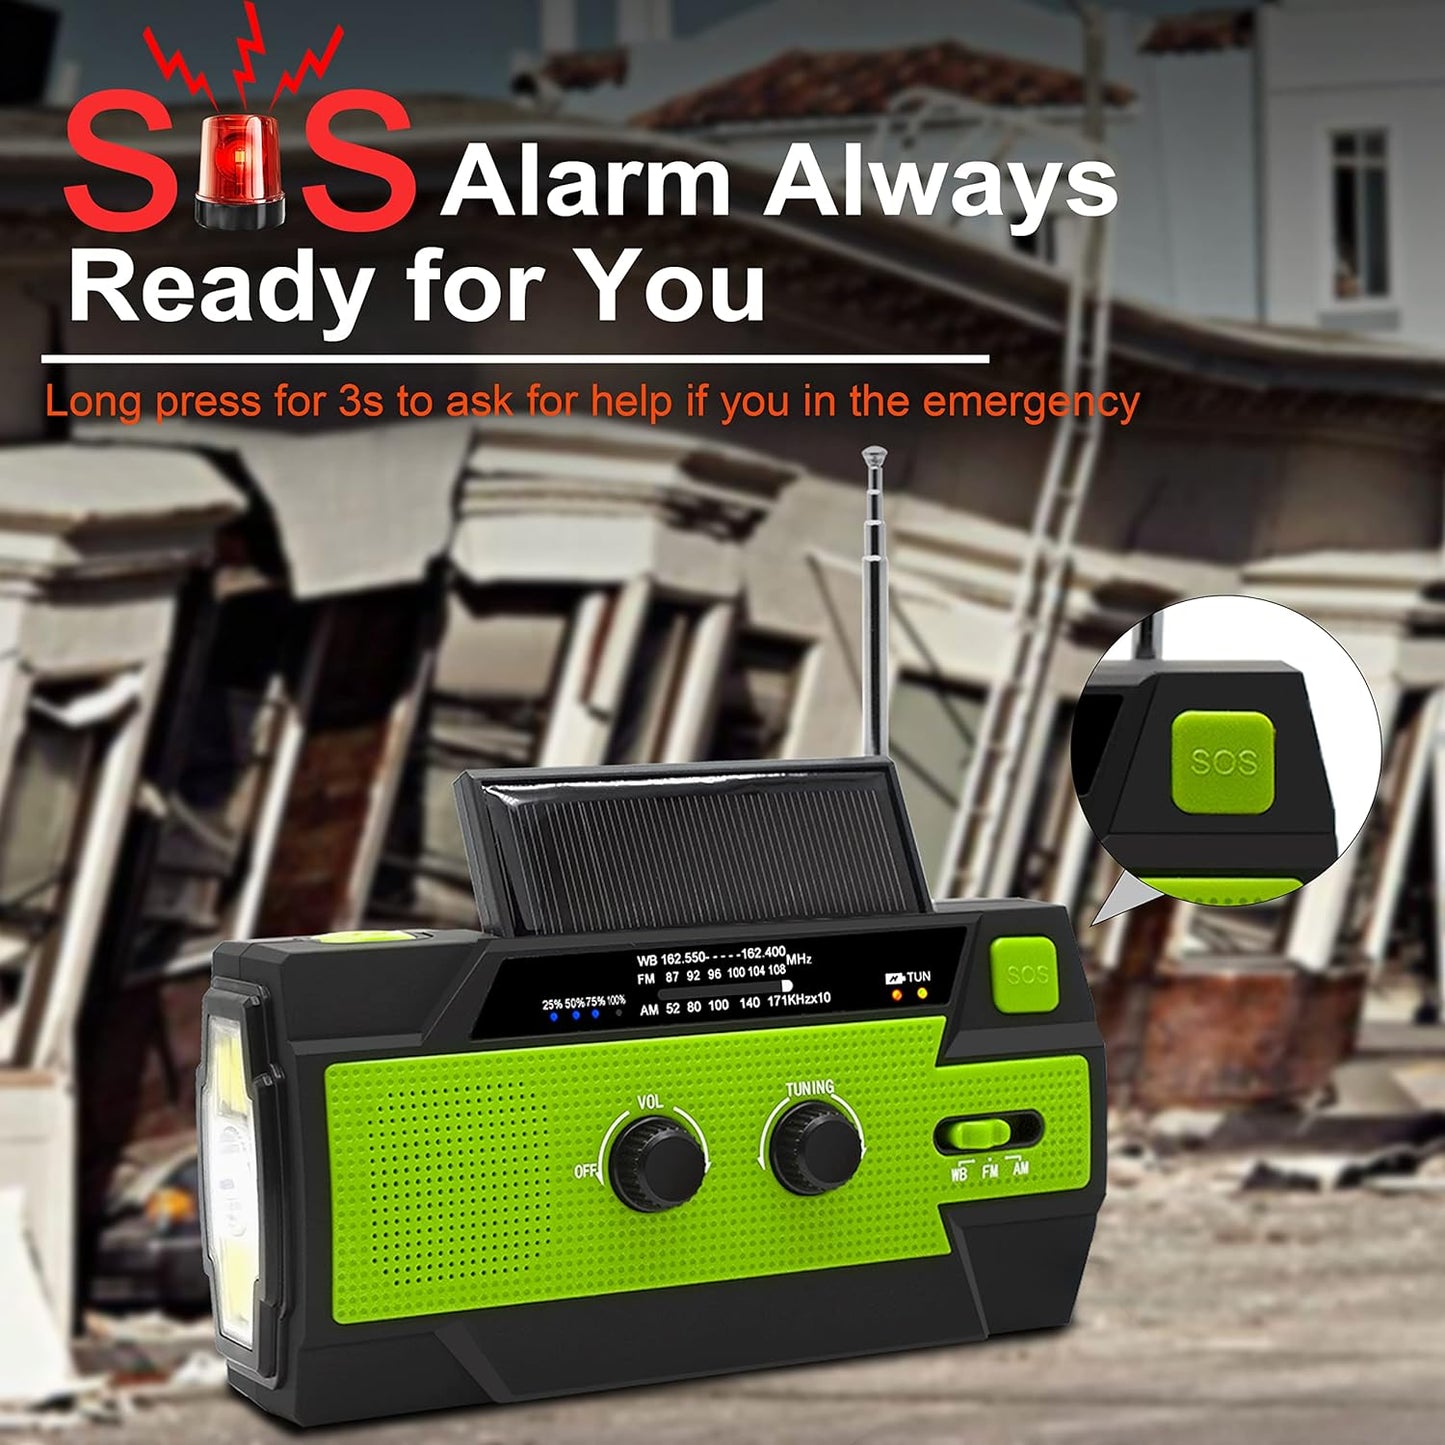 Professional Title: "4000mAh Emergency Crank Weather Radio - Solar Hand Crank Portable AM/FM/NOAA with 1W 3 Mode Flashlight, Motion Sensor Reading Lamp, Cell Phone Charger, and SOS - Ideal for Home and Emergency Situations (Green)"